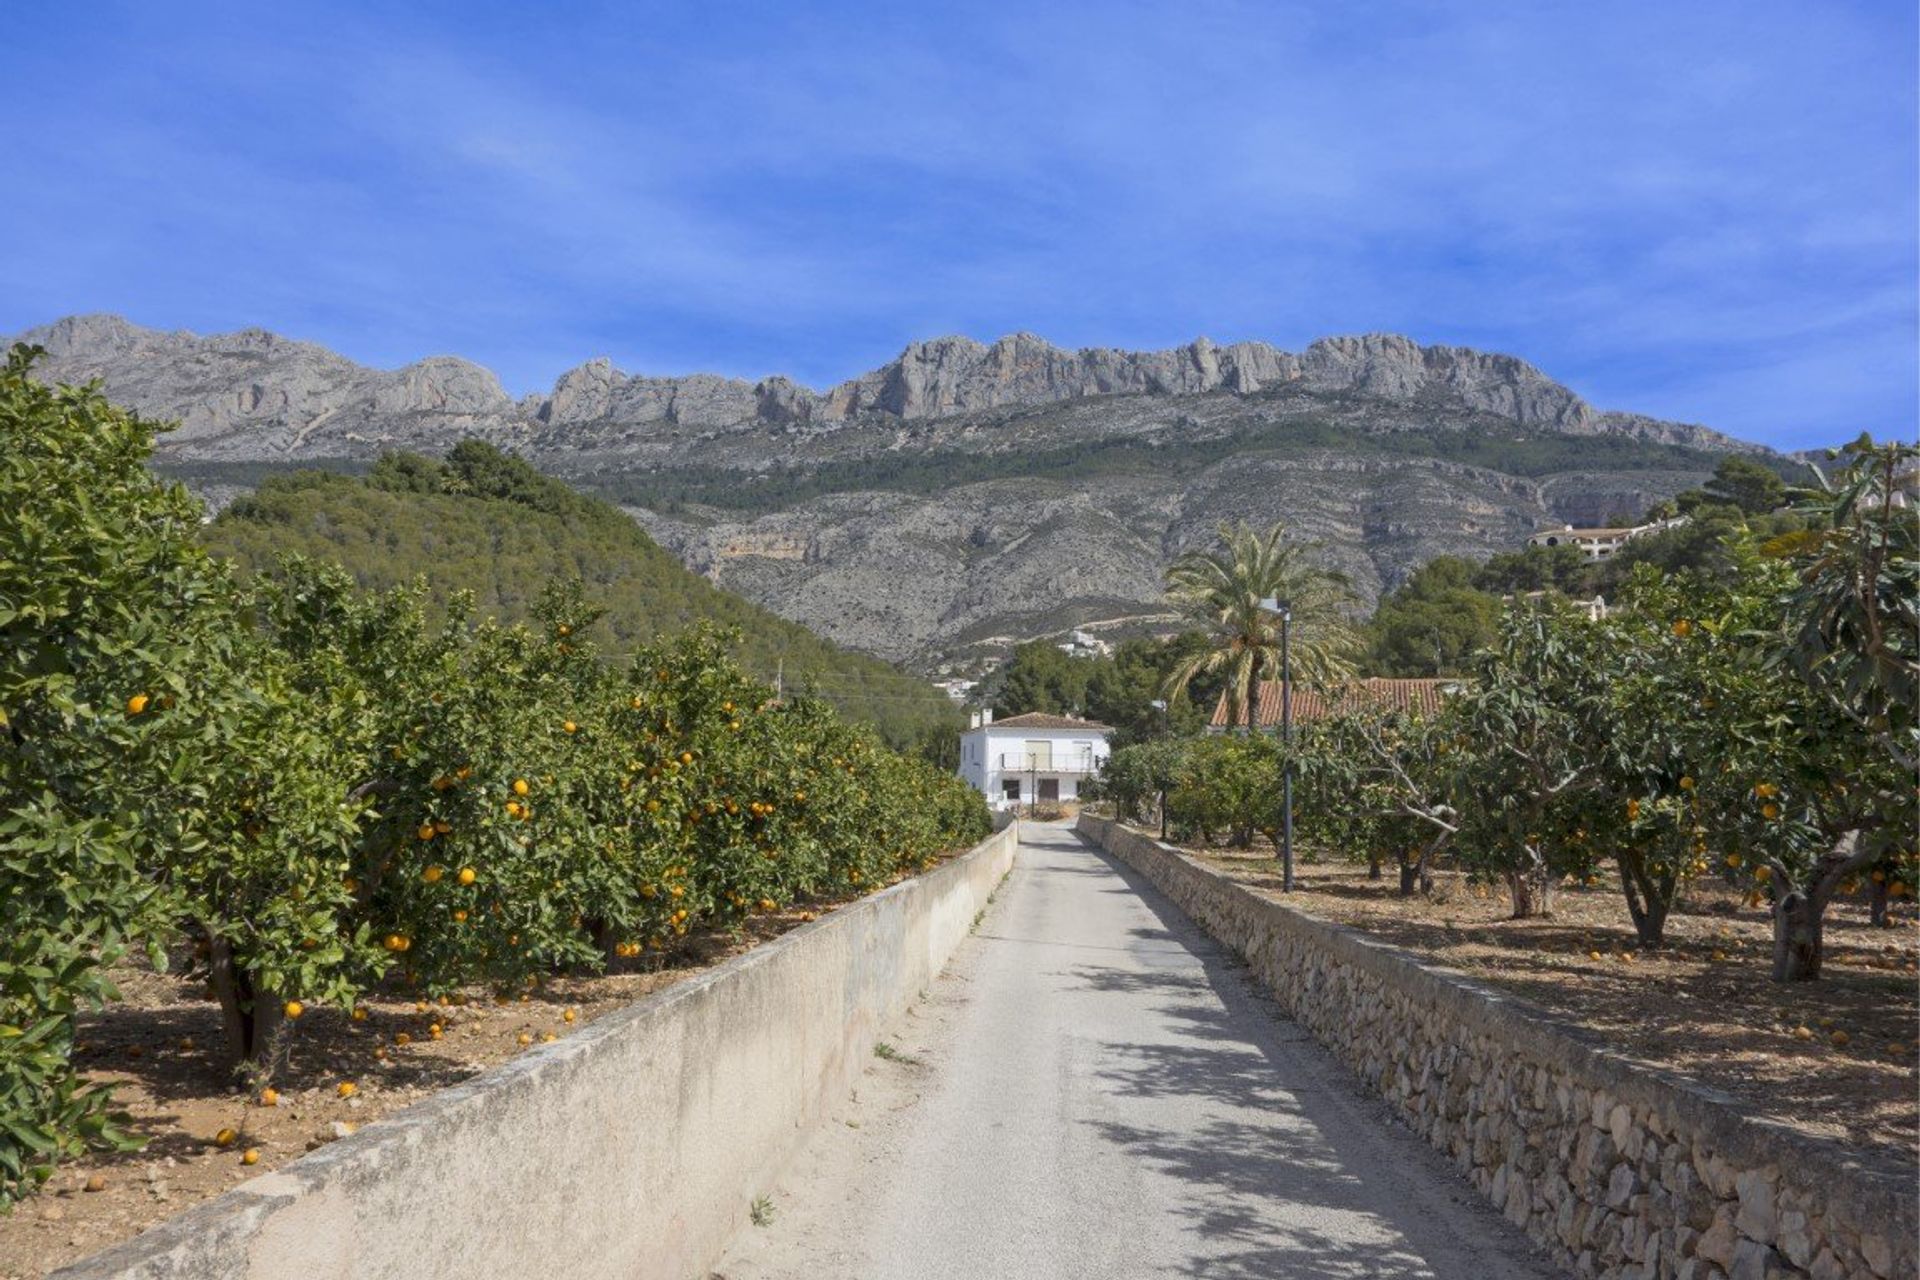 Altea is the perfect place to hire a bike, with its many scenic cycling routes overlooking the mountains and Mediterranean